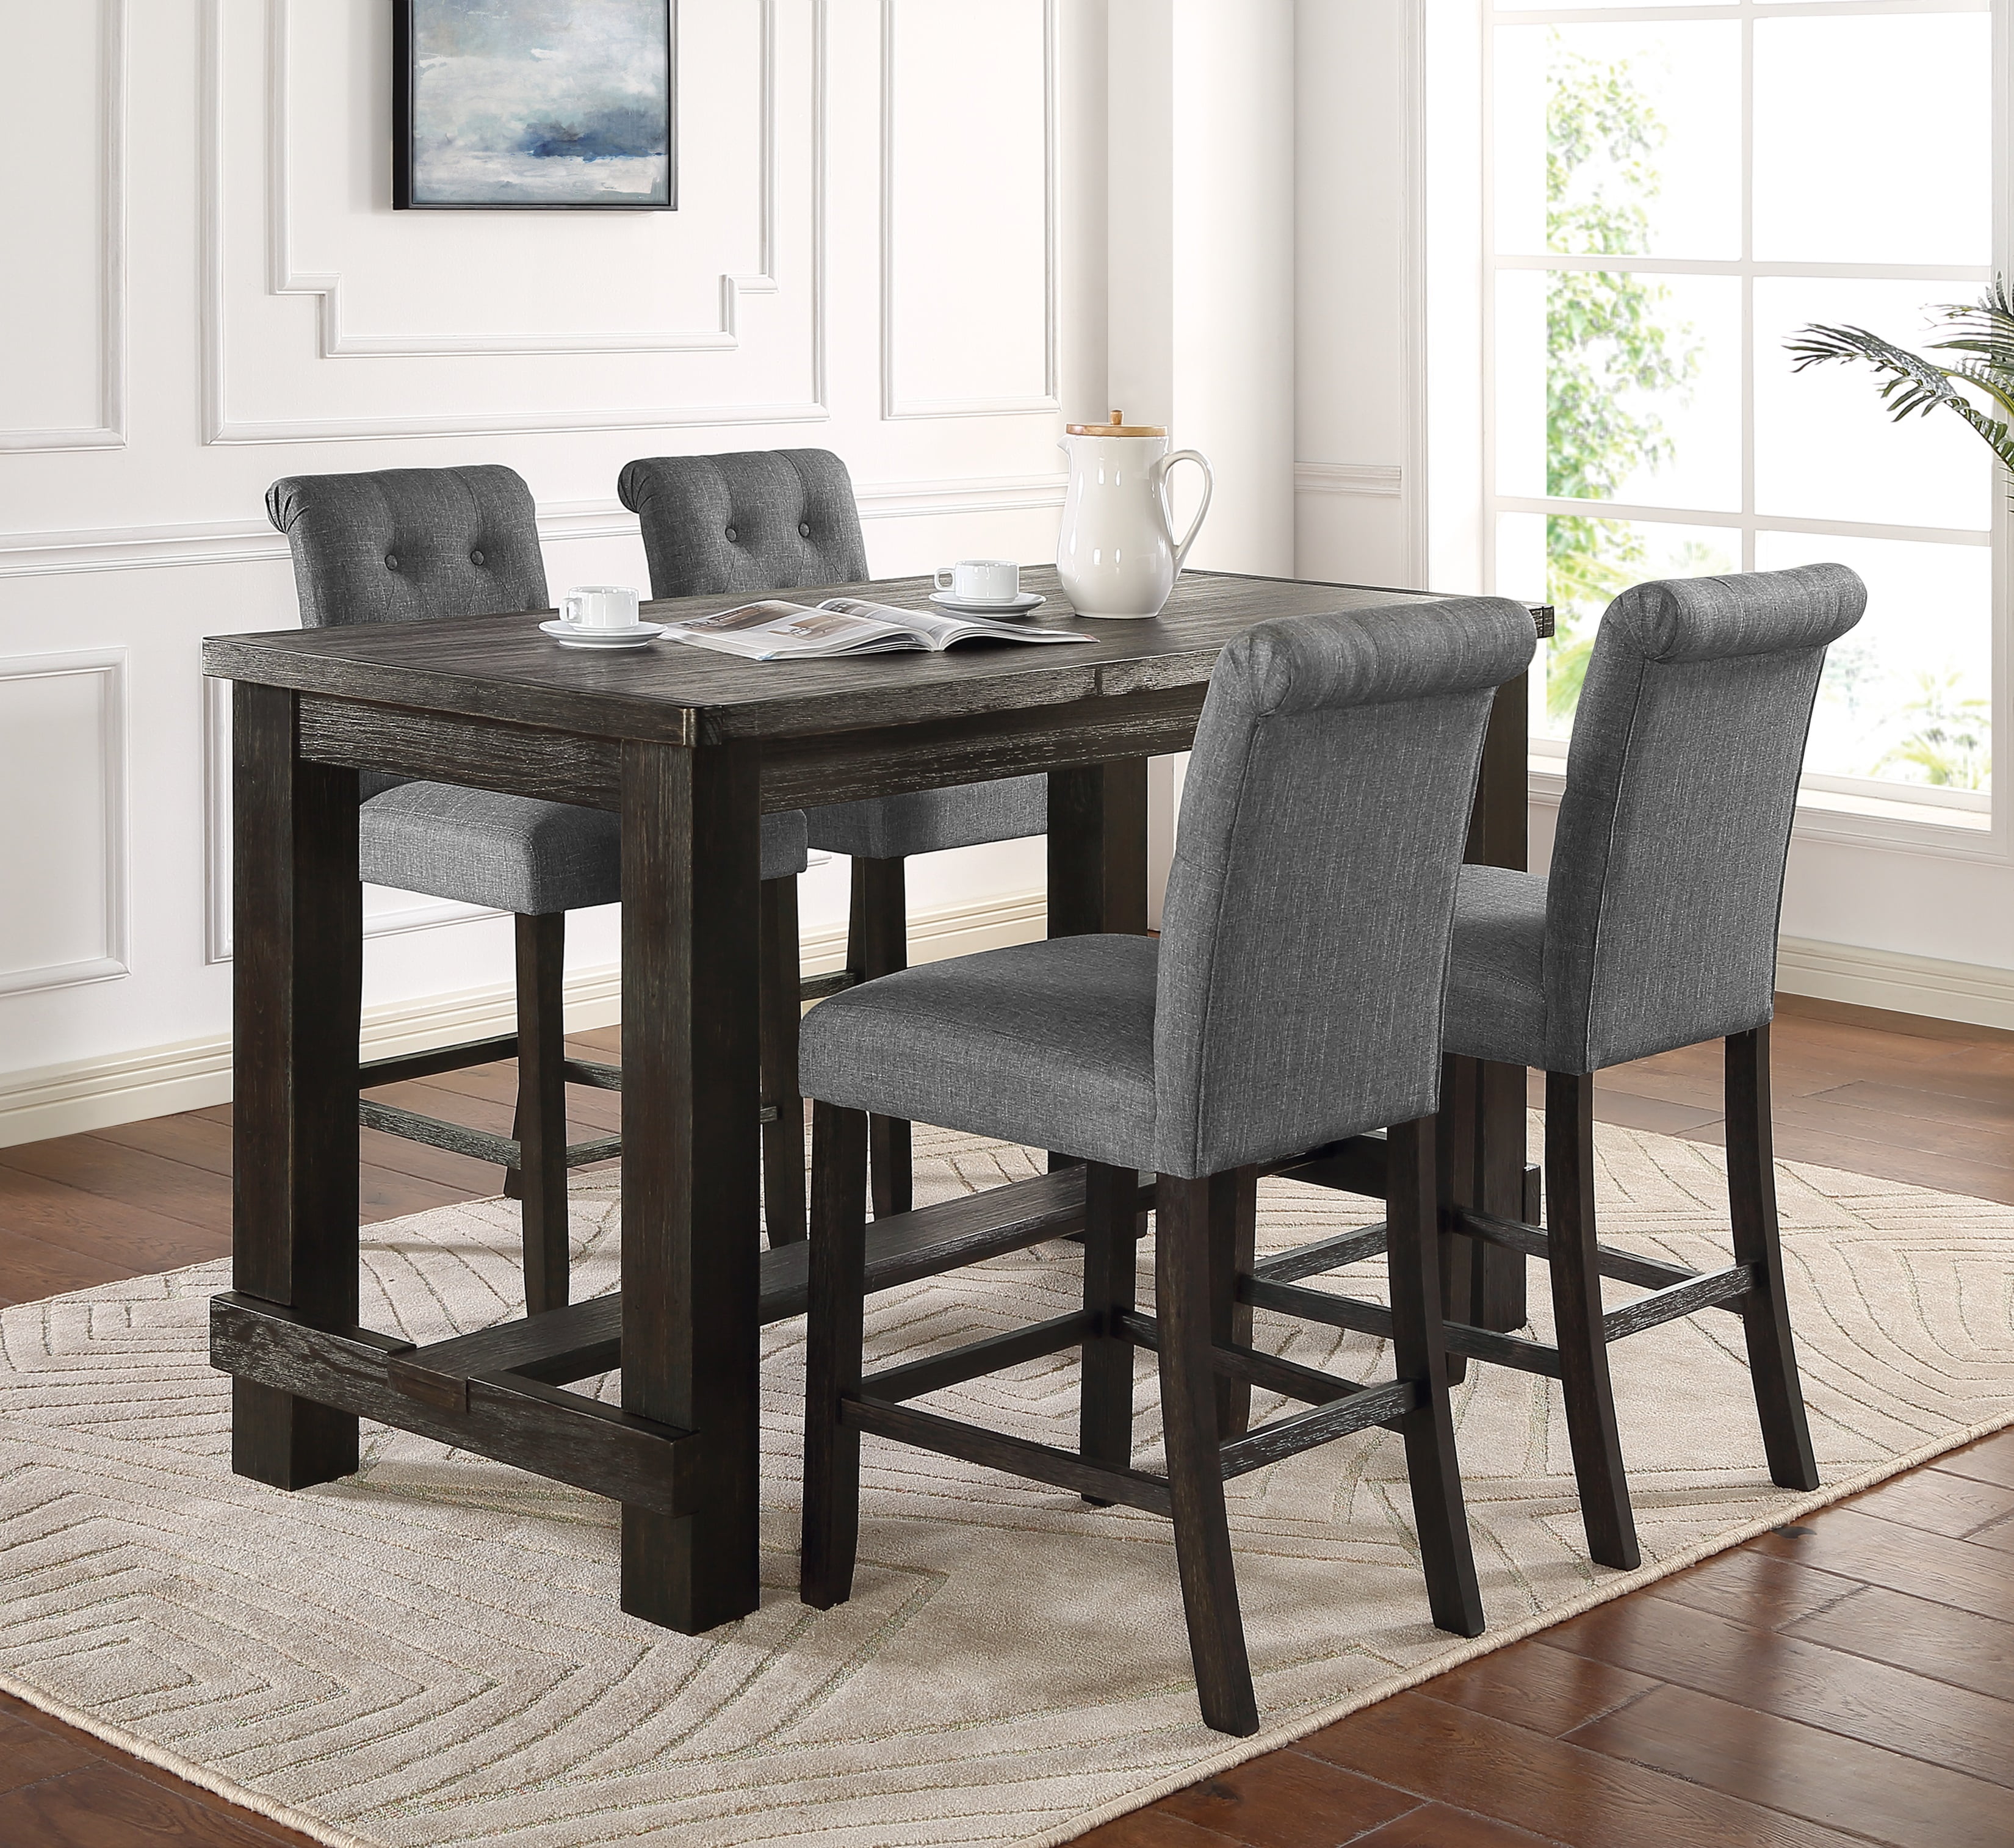 Leviton Antique Black Finished Wood 5-Piece Counter Height Dining Set ...